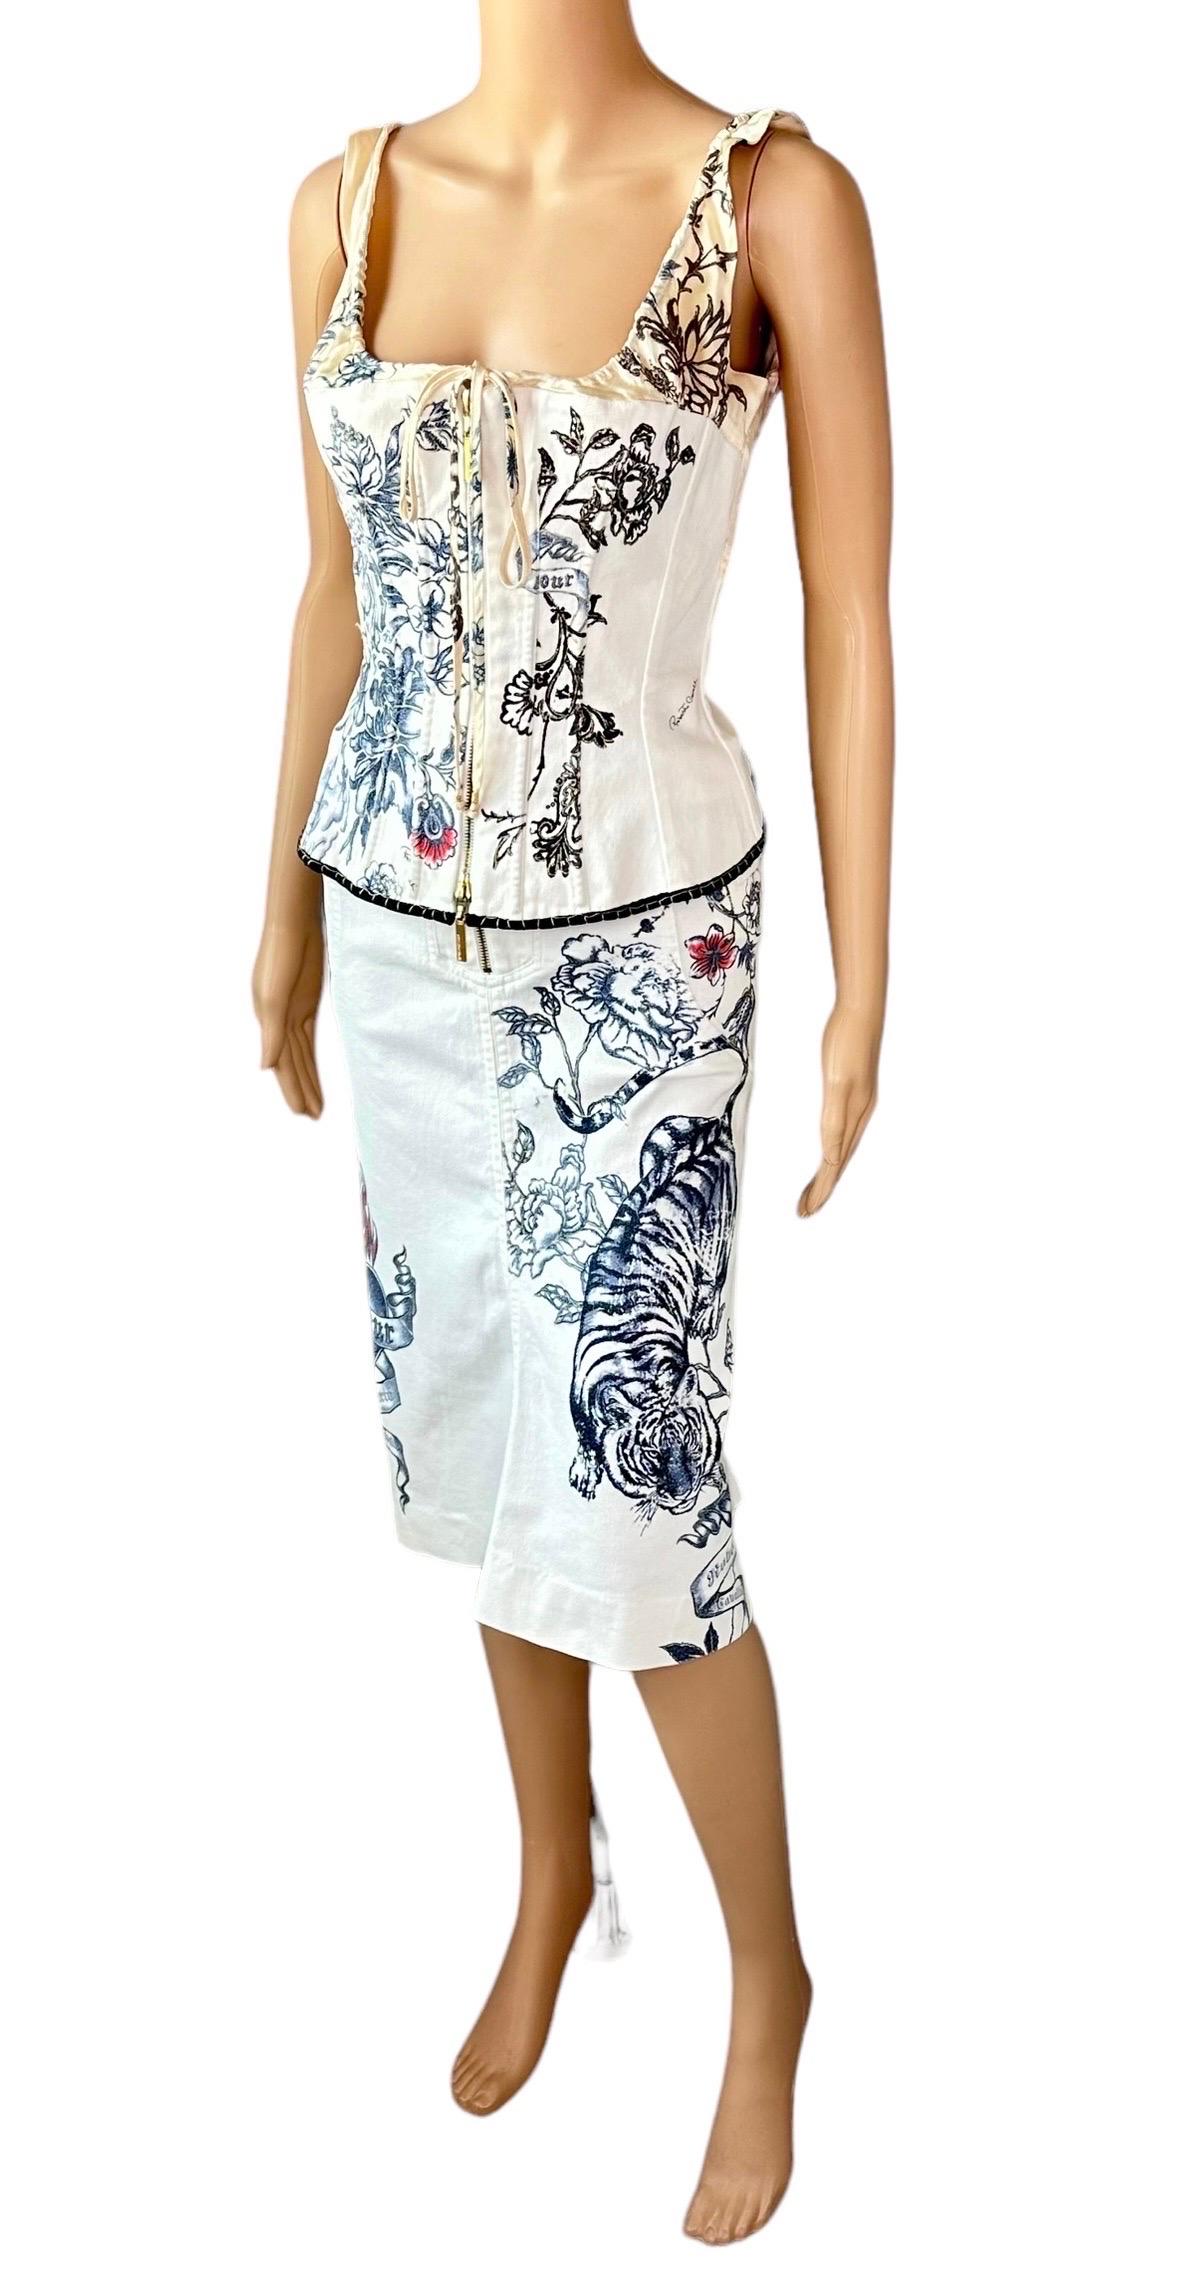 Roberto Cavalli S/S 2003 Tattoo Print Corset Bustier Denim Top & Skirt 2 Piece Set Ensemble 

Please note the top is size S and skirt is size L but runs smaller and is easily alterable by a professional tailor. 

Condition: Skirt is missing the